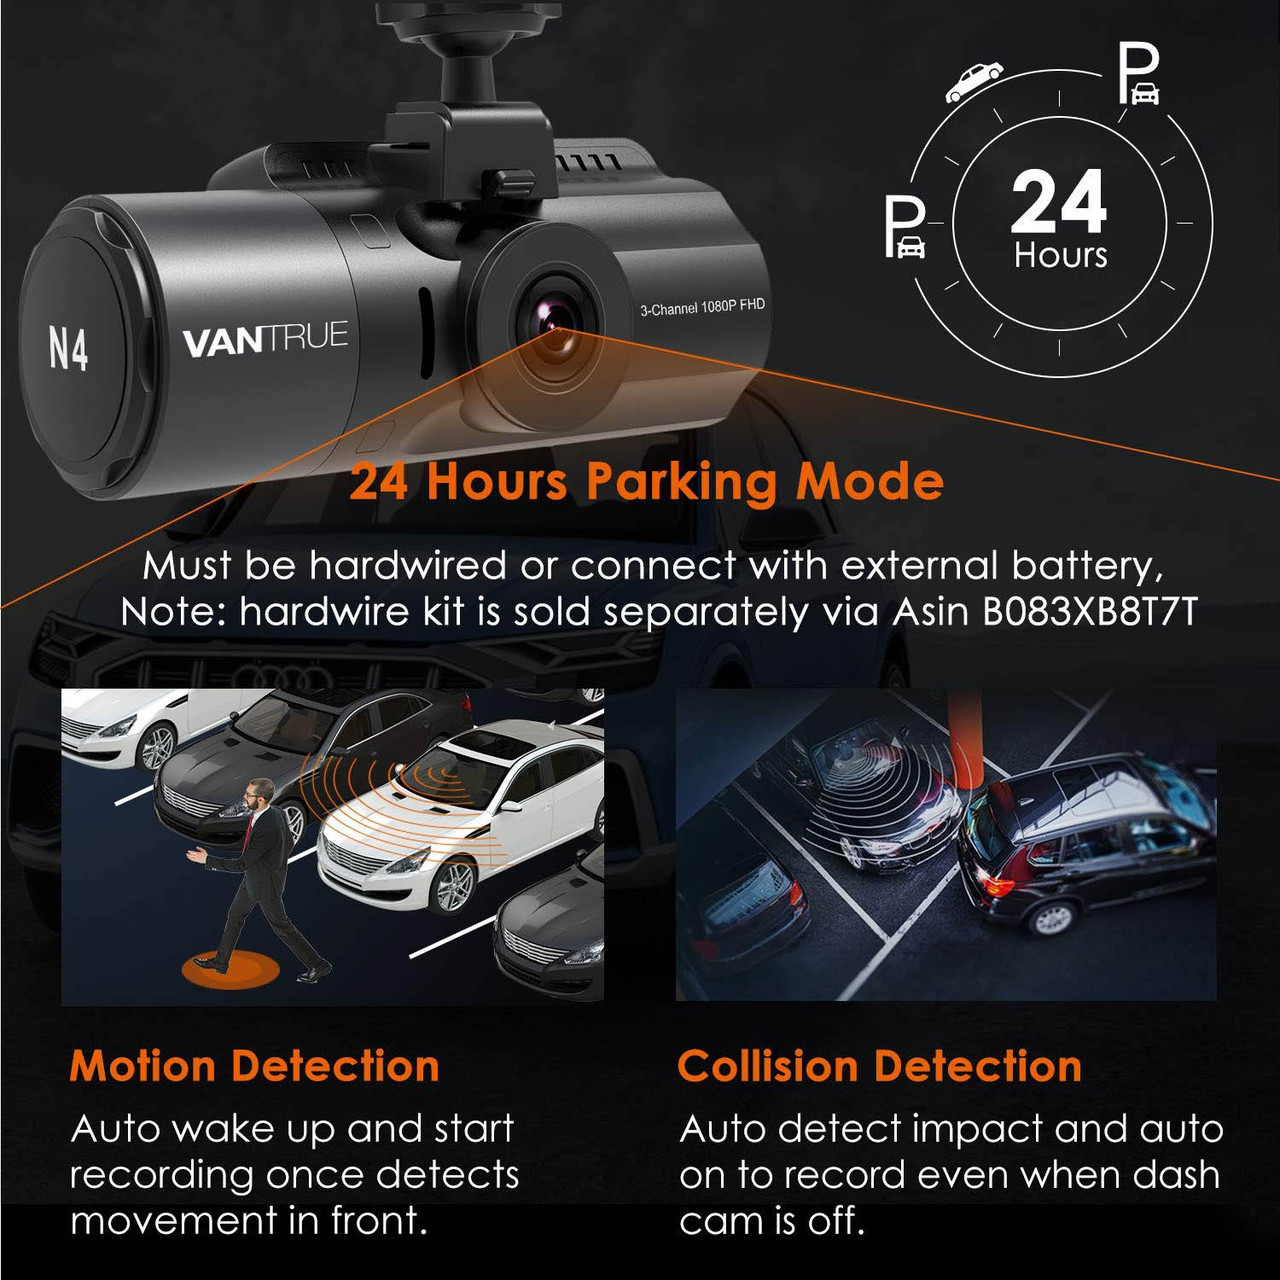  Vantrue S1 4K Dash Cam Front and Rear, 1080P Dual GPS Dash  Camera with 24 Hours Parking Mode, Enhanced Night Vision, Motion Detection,  Capacitor, Single Front 60FPS, G-Sensor, Support 256GB Max 